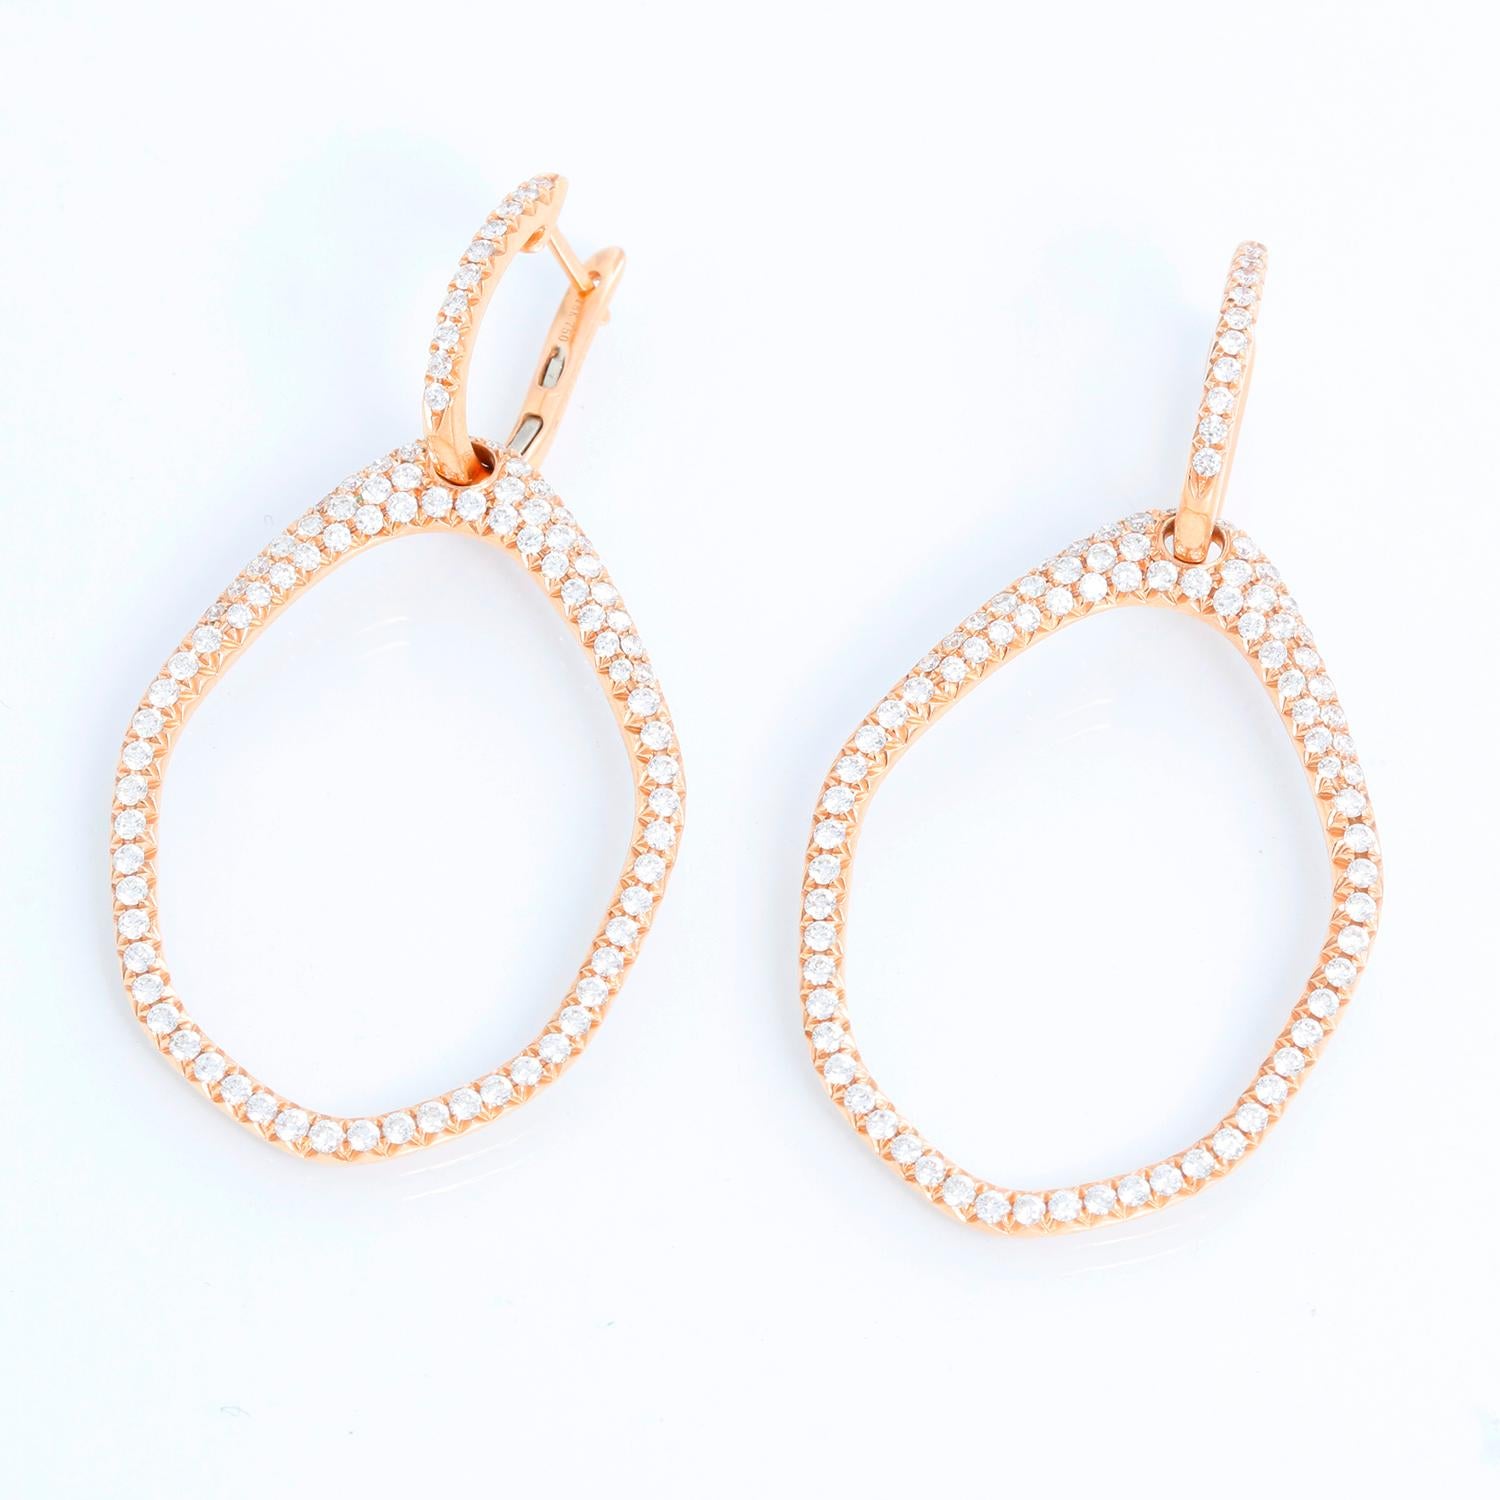 These beautiful 18k rose gold earrings feature 2.03 carats of very white SI1 clarity, H-color diamonds. These earrings are versatile and can be worn with or with out the dangling hoop. The earrings measure apx. 2-inches in length and 5/8-inch in